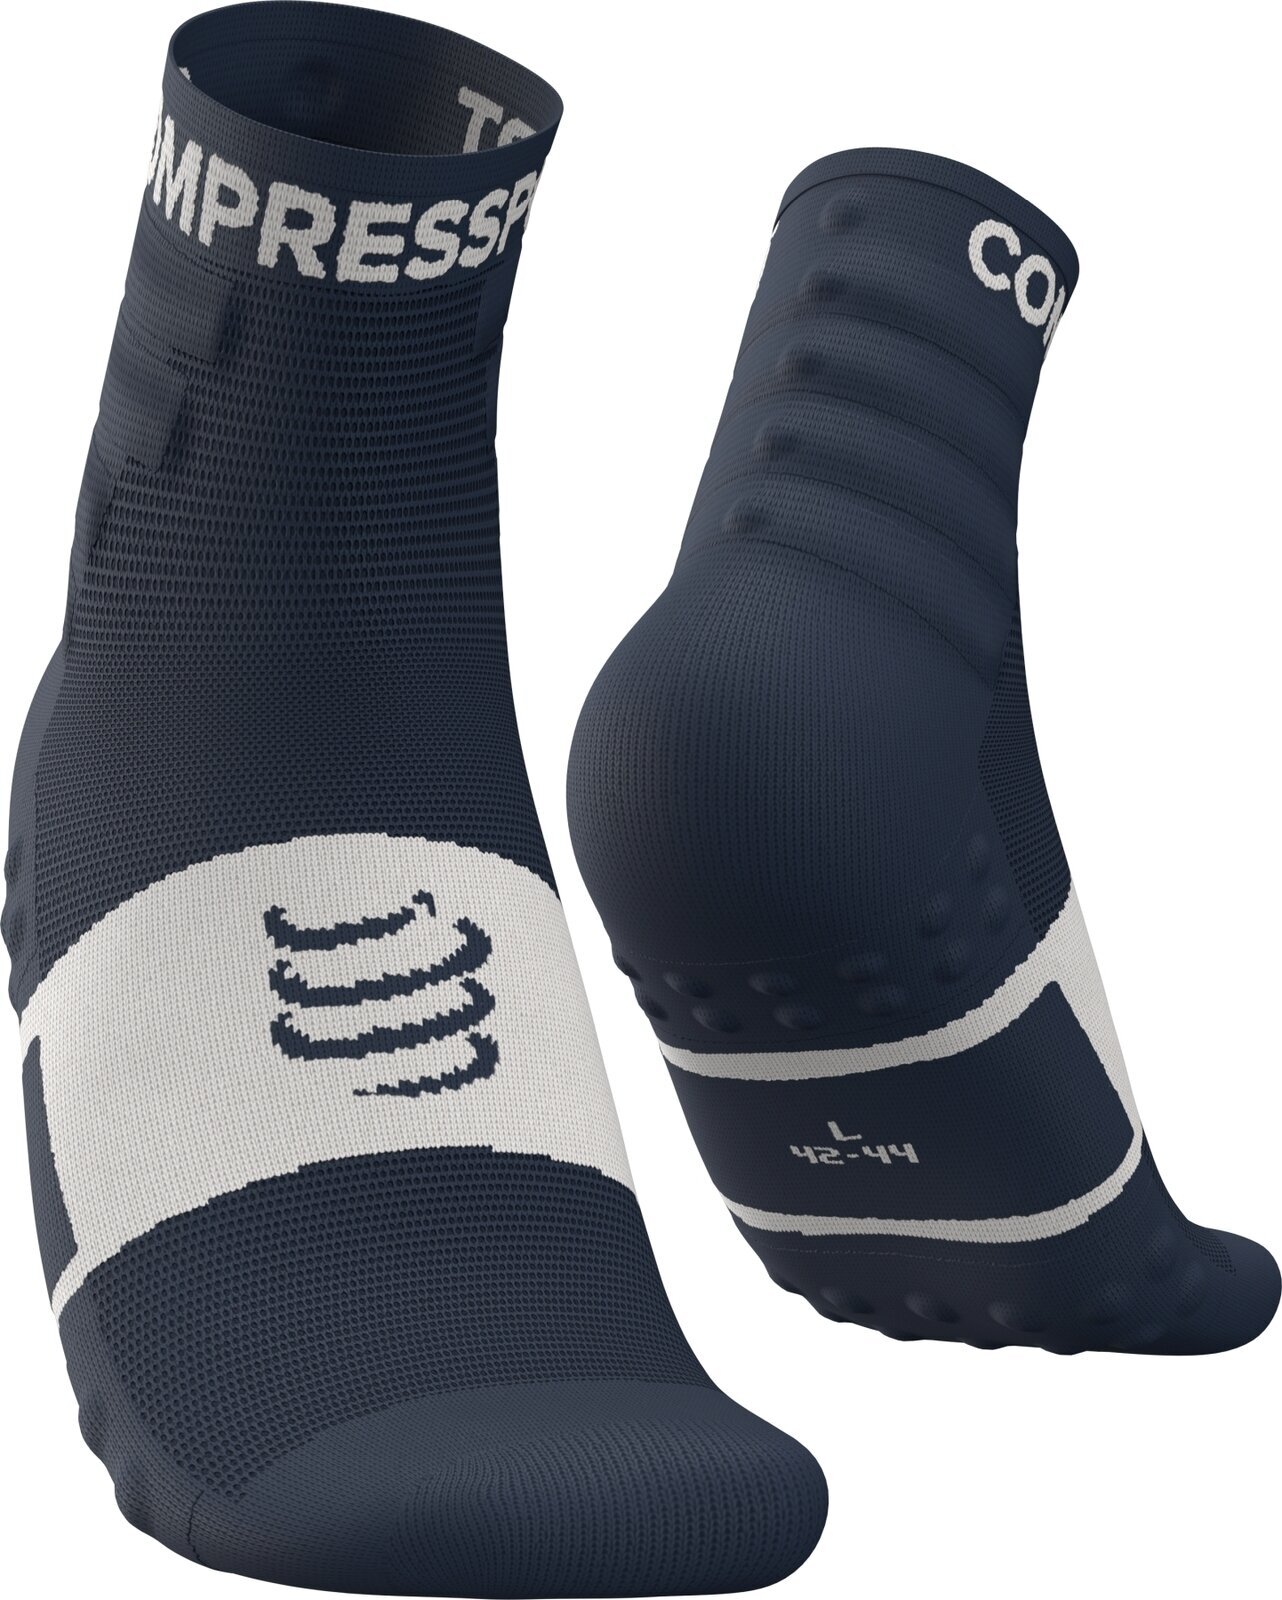 Calcetines para correr Compressport Training Socks 2-Pack Dress Blues/White T3 Calcetines para correr